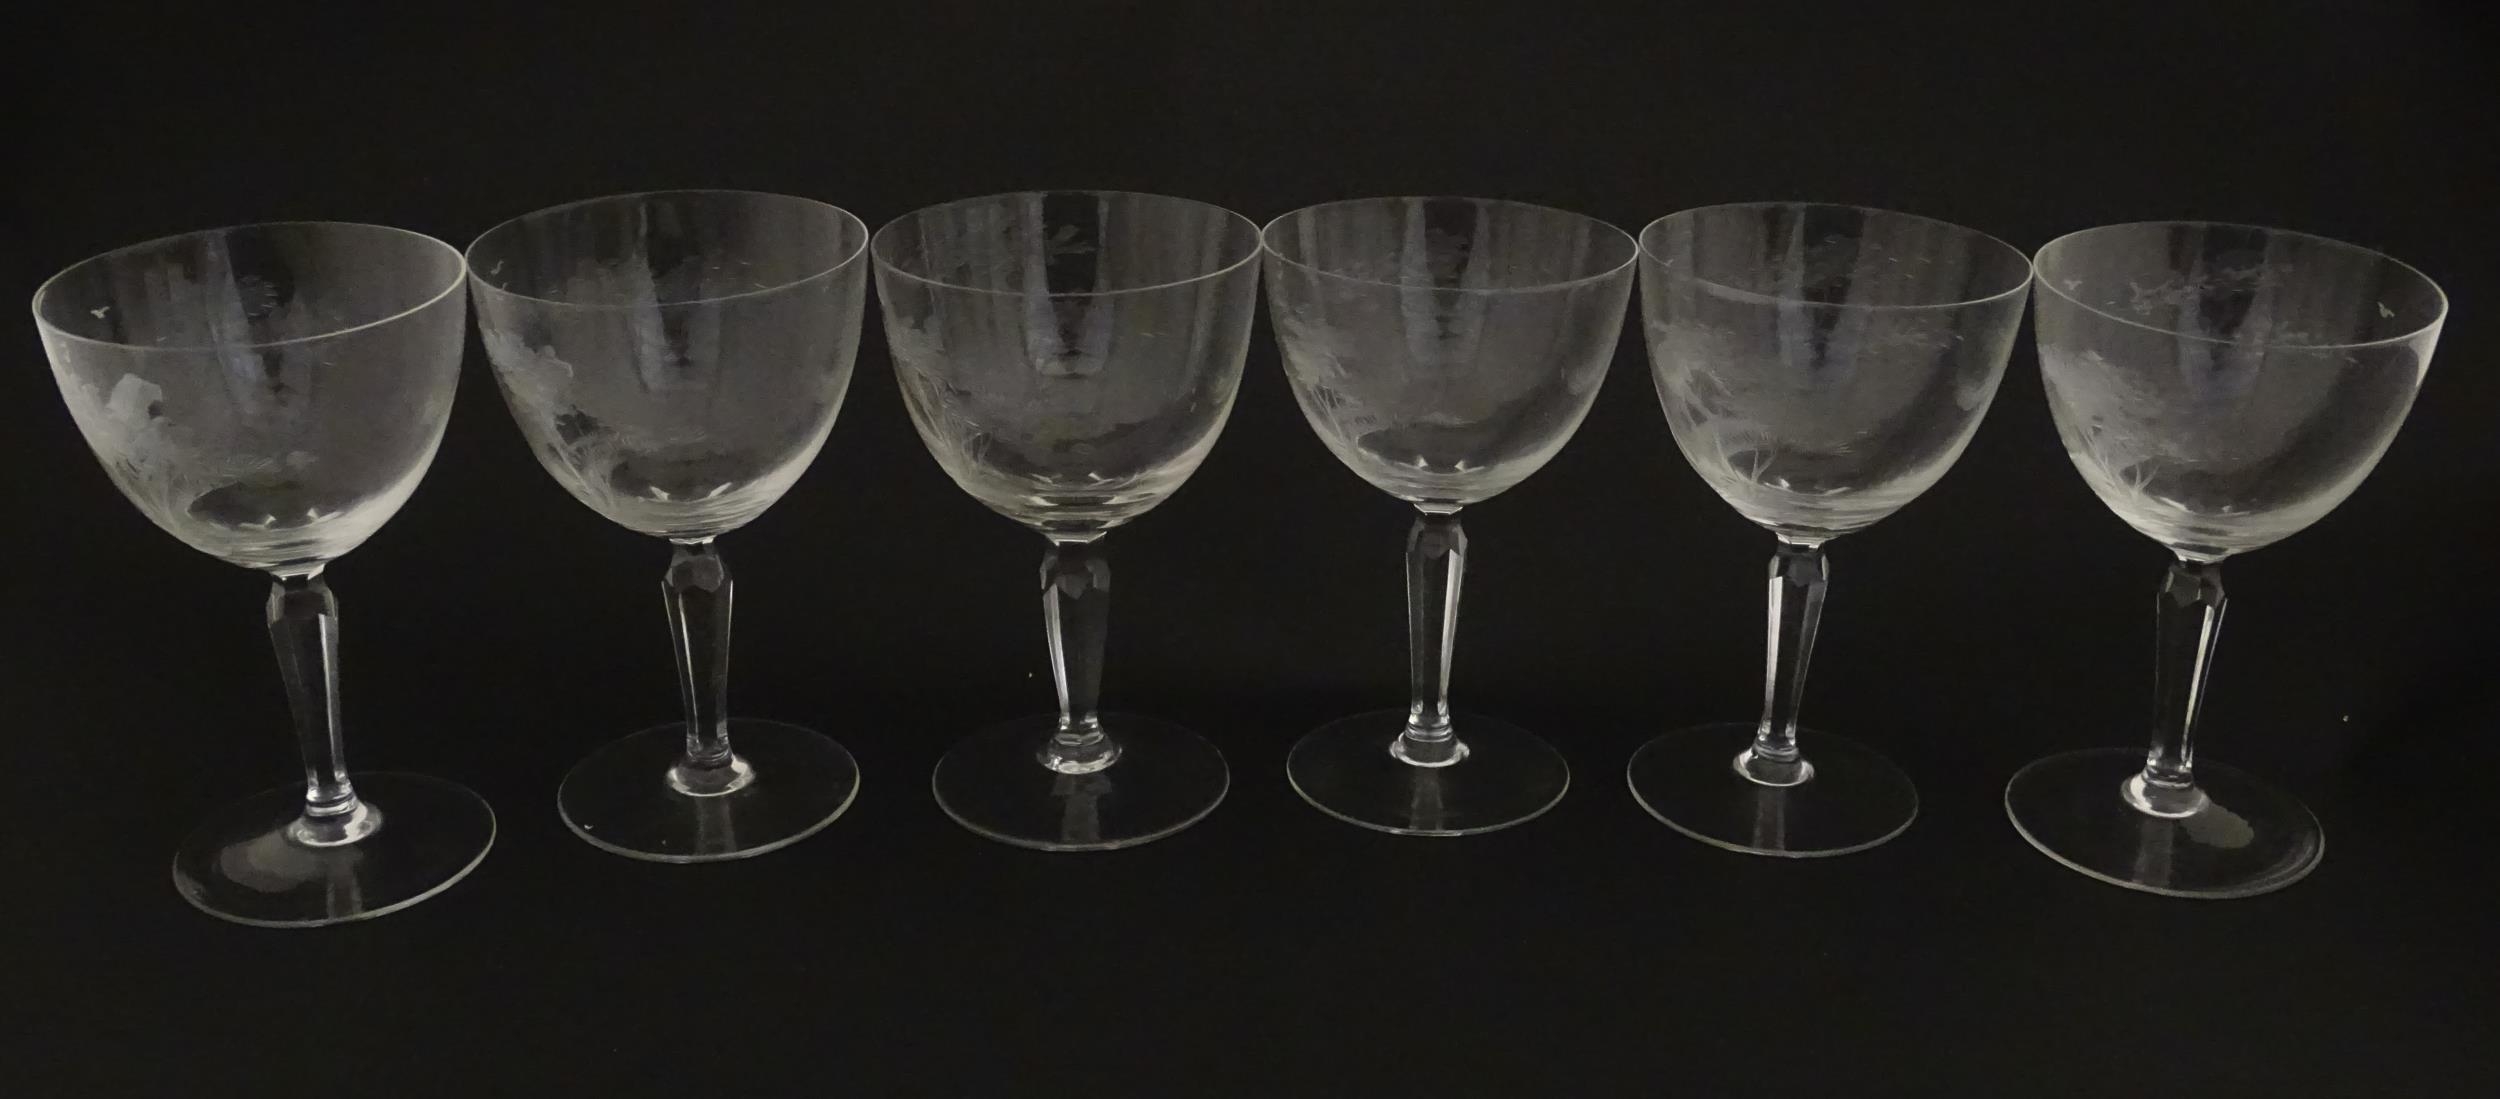 Six Rowland Ward wine glasses with engraved Safari animal detail. Unsigned. Approx. 5 1/2" high ( - Image 7 of 15